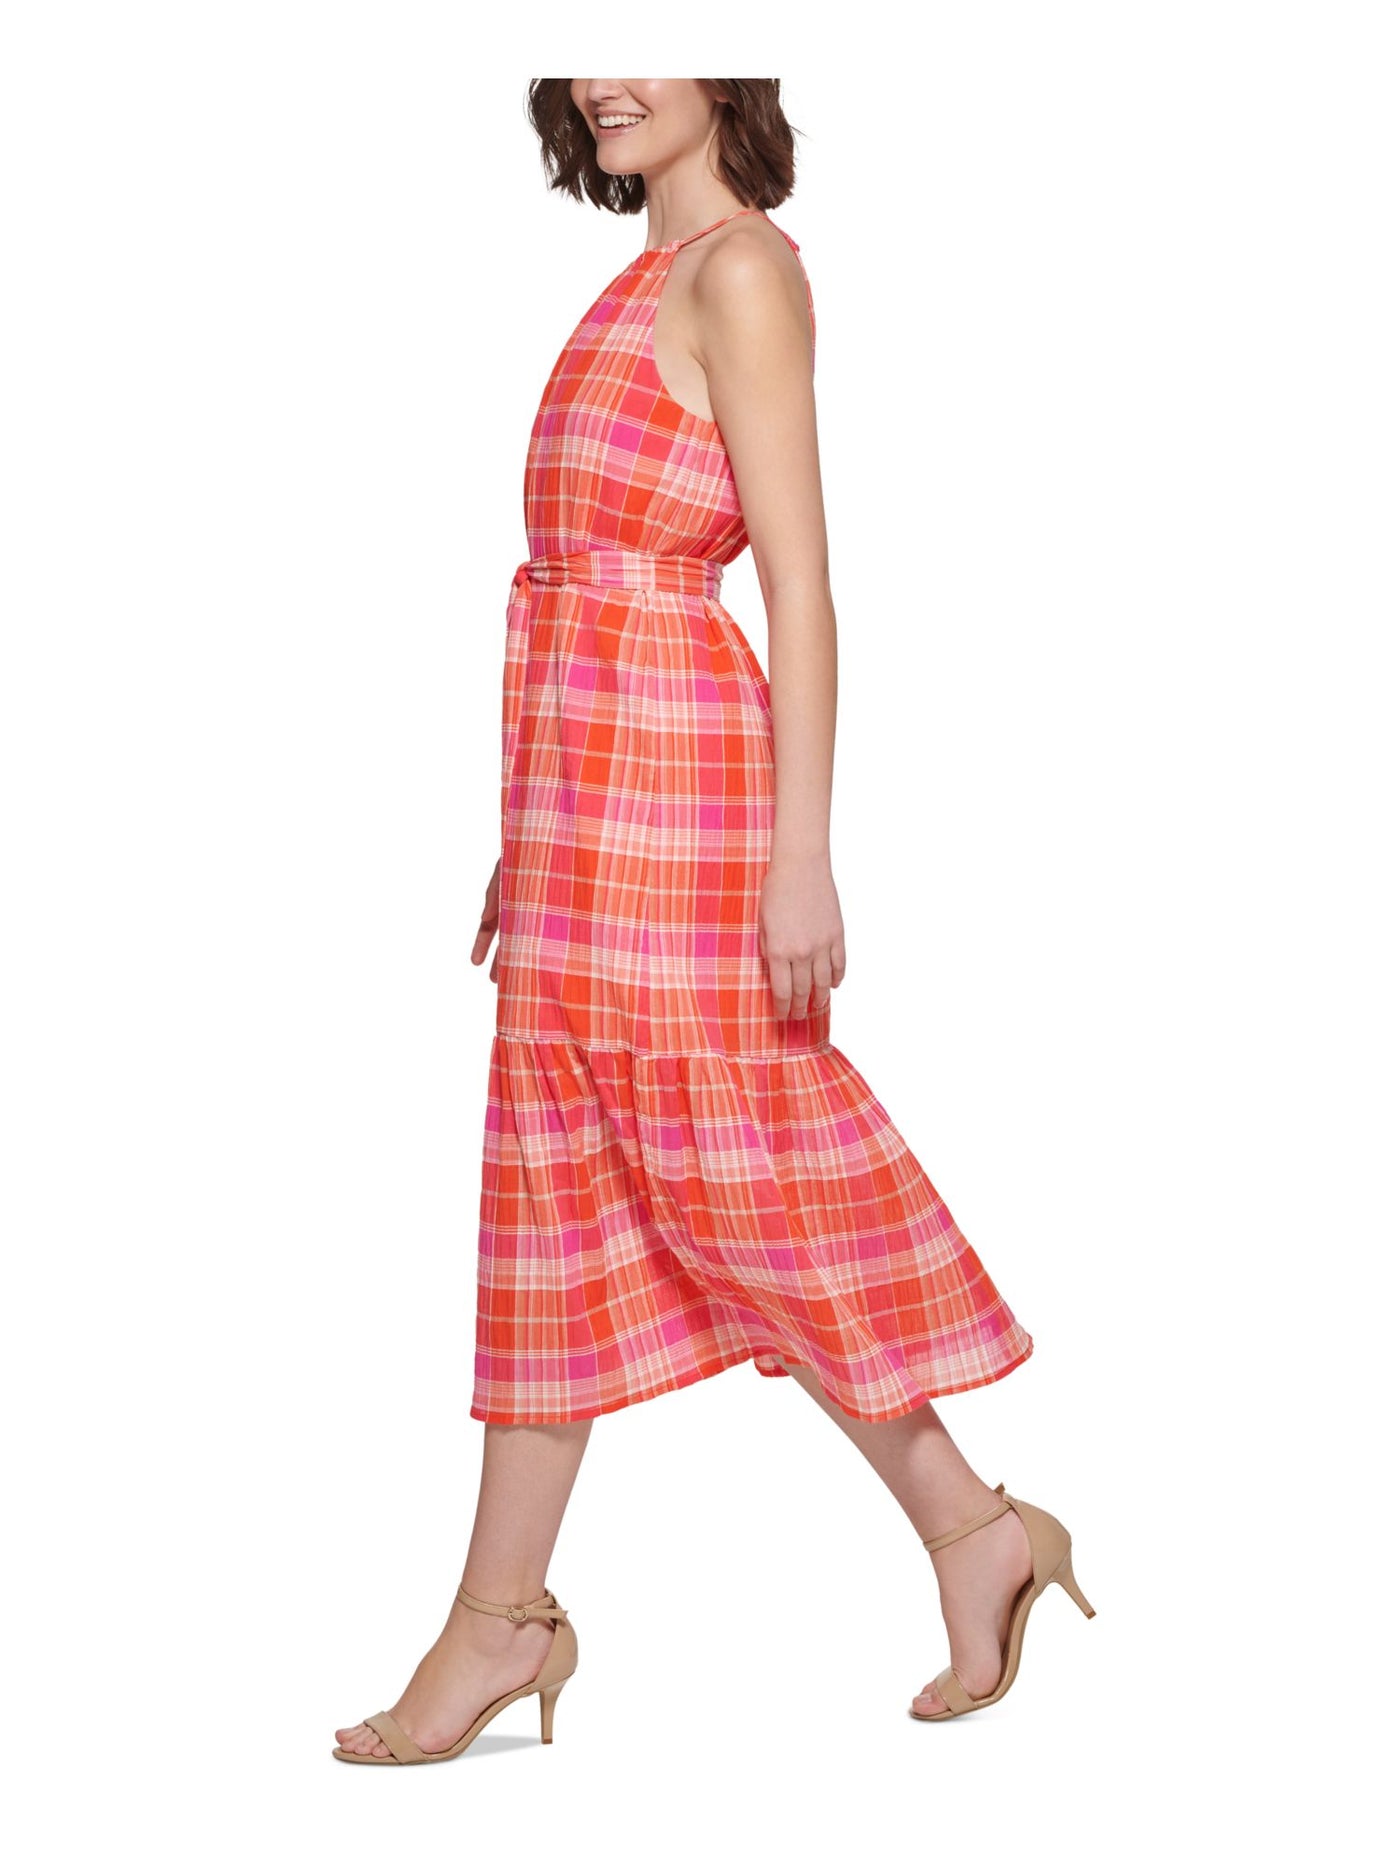 TOMMY HILFIGER Womens Red Tie Keyhole Back Lined Sheer Plaid Sleeveless Halter Midi Fit + Flare Dress 6